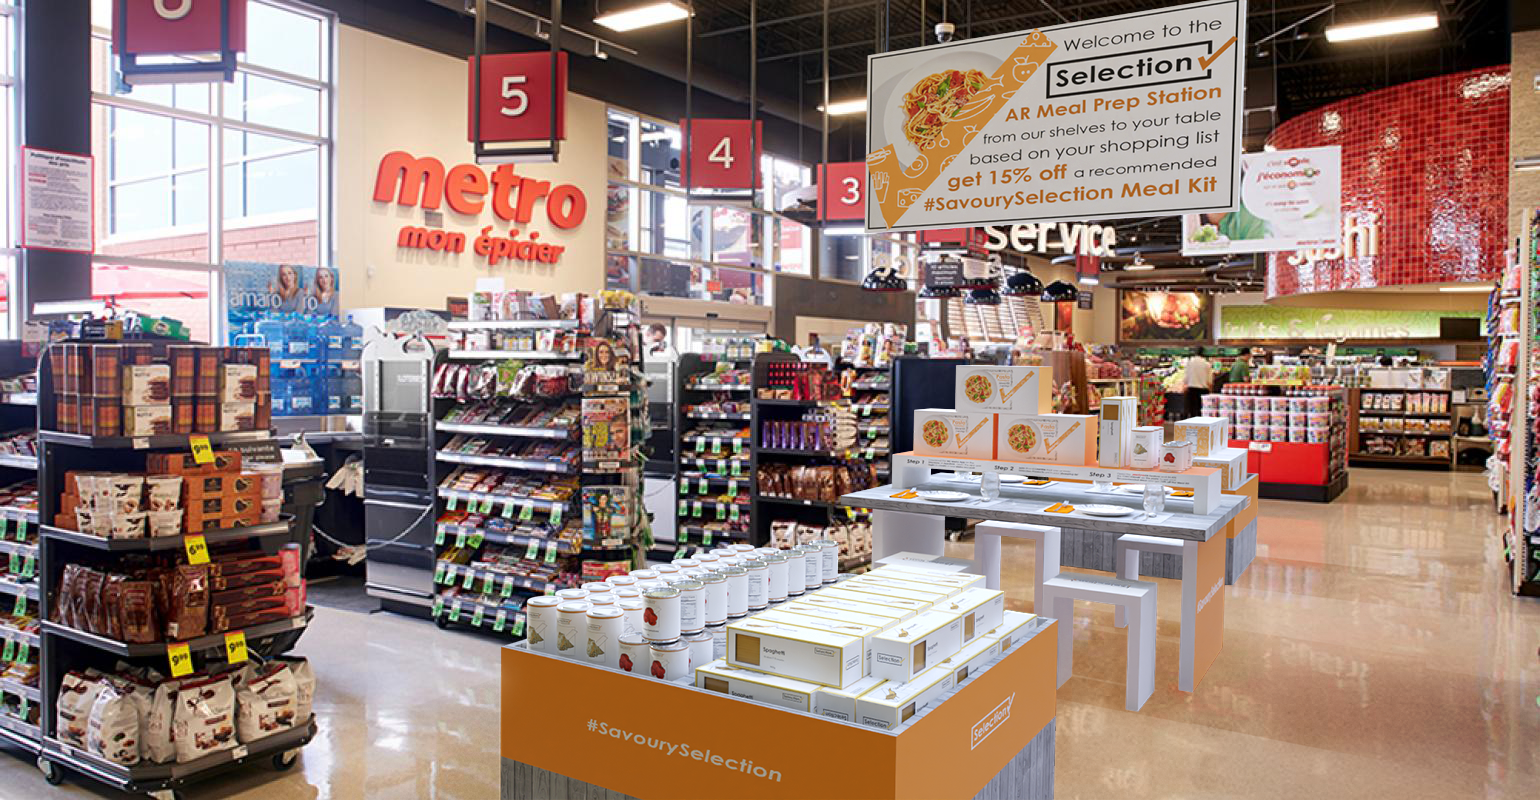 "Taste our Selection": Metro's Selection Private Label Rebrand and Launch Campaign Concept